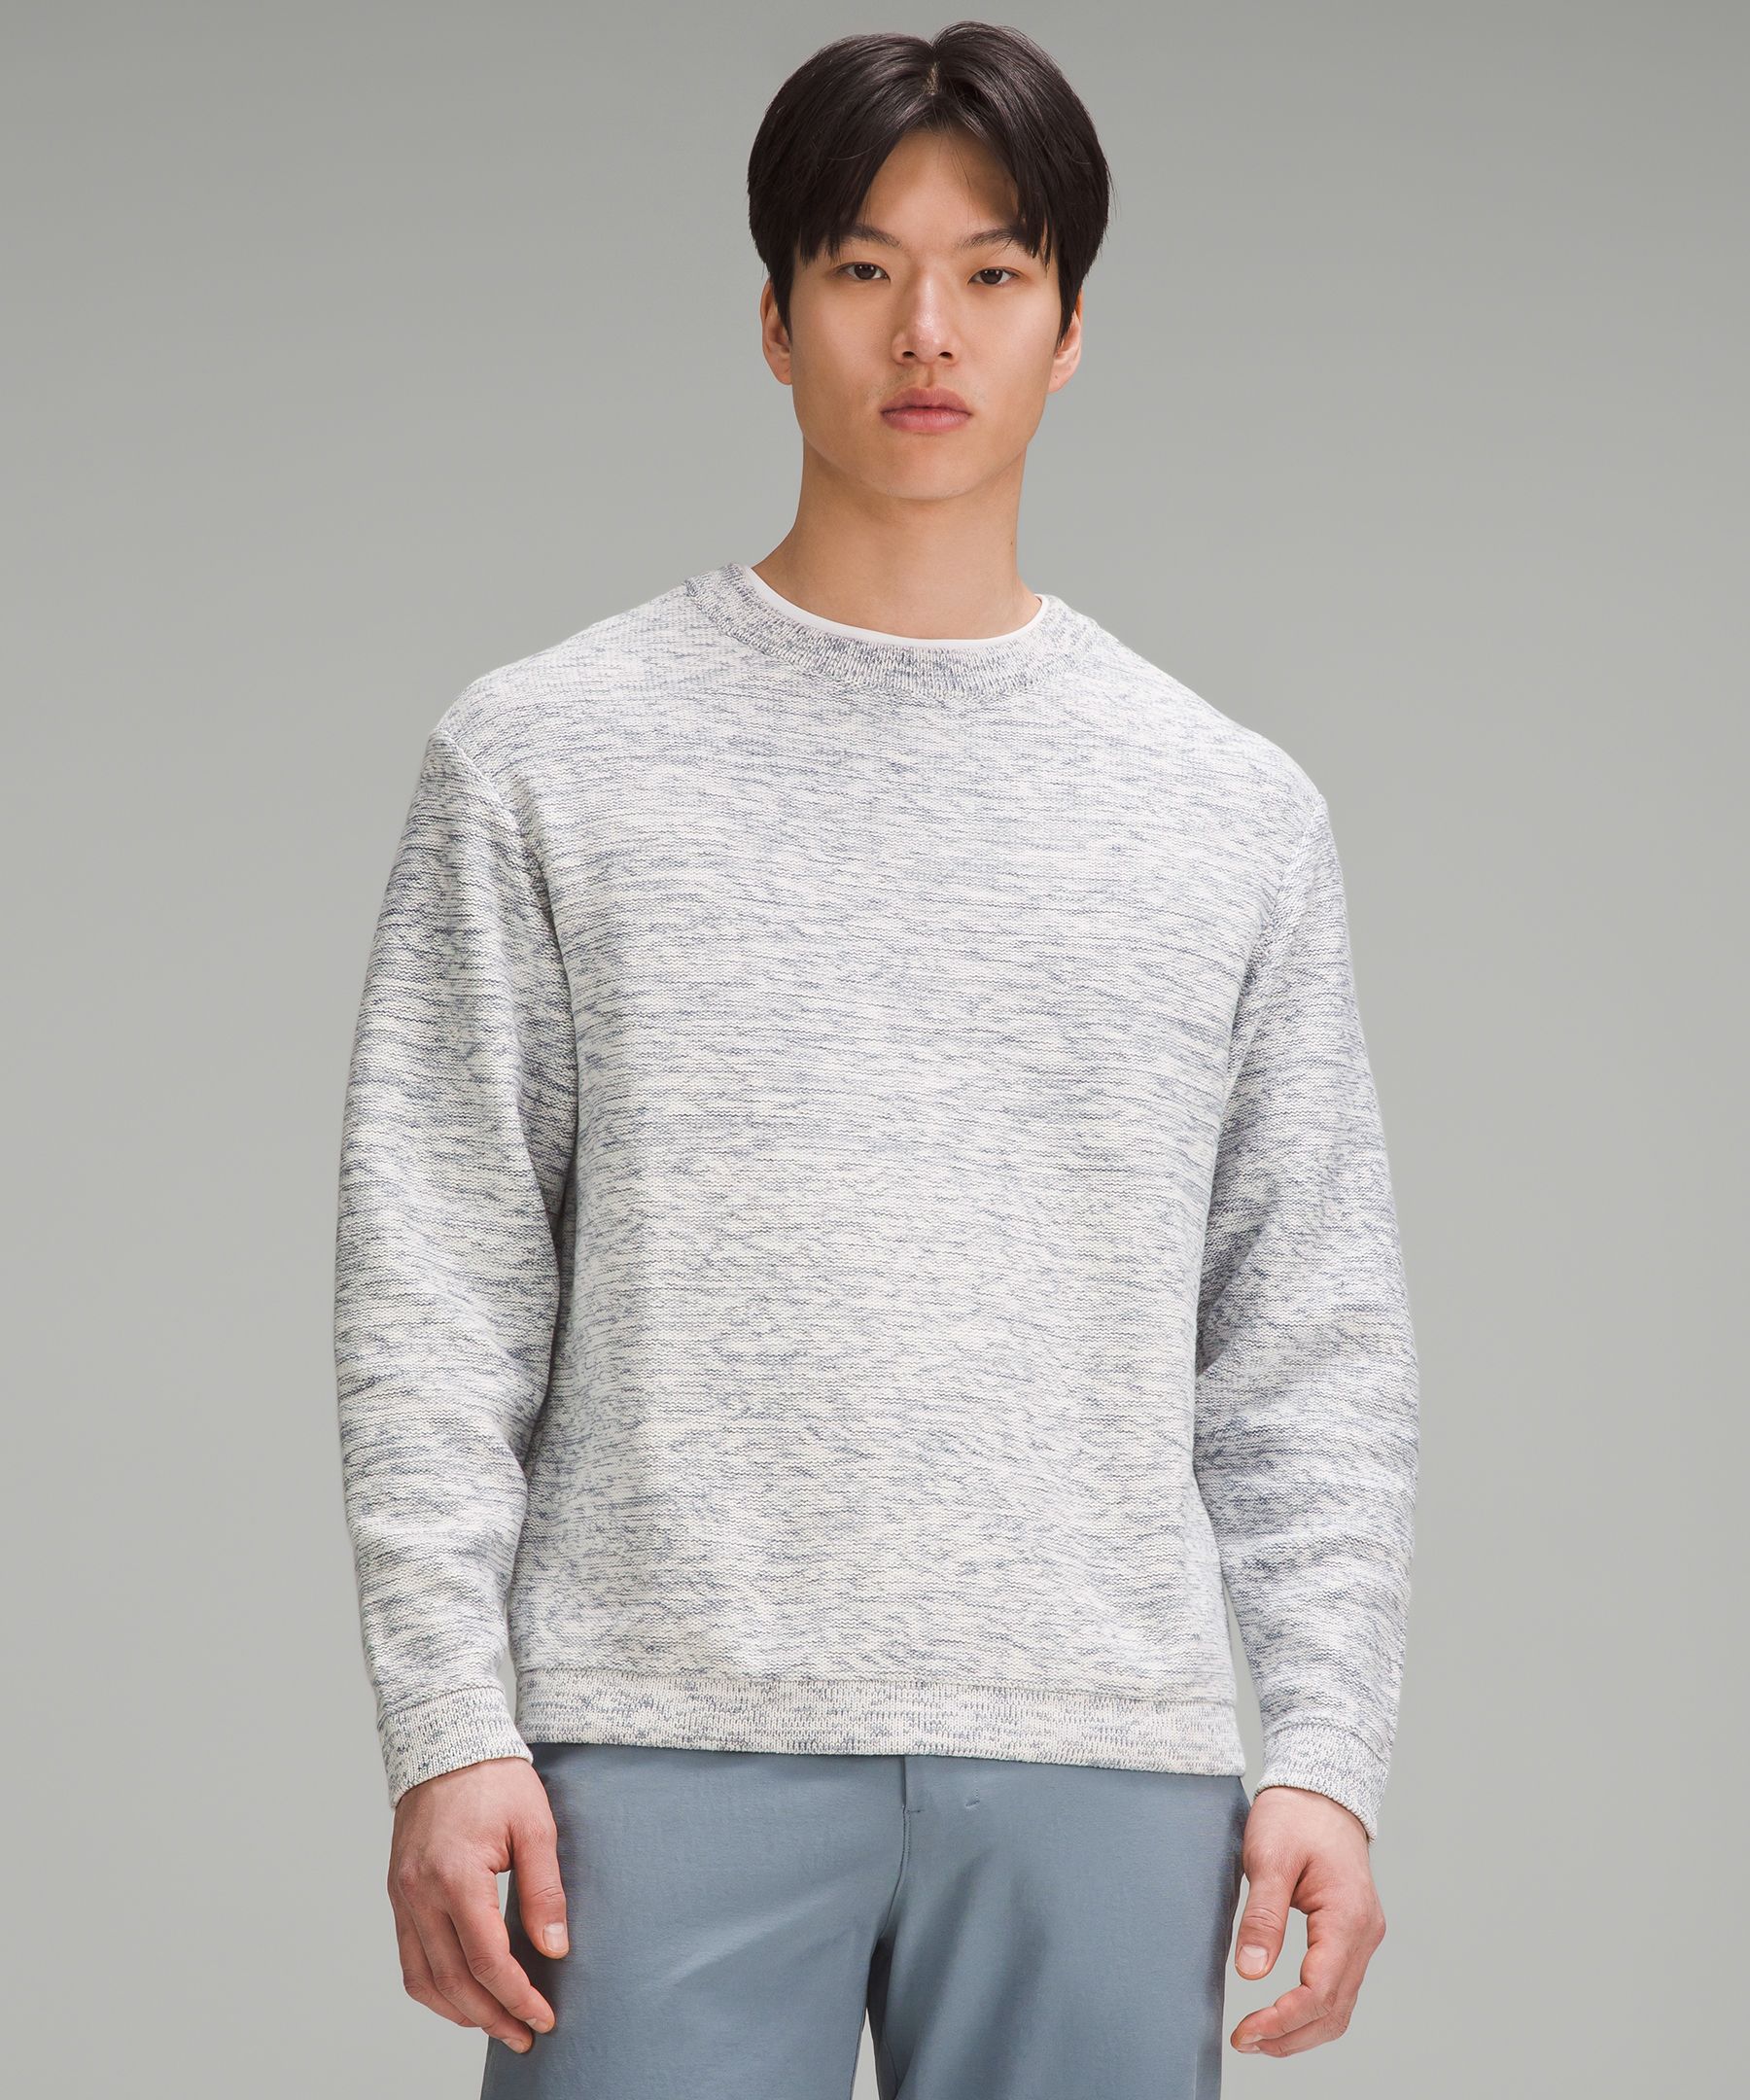 Men's Relaxed Fit Crew Neck Wool Sweater